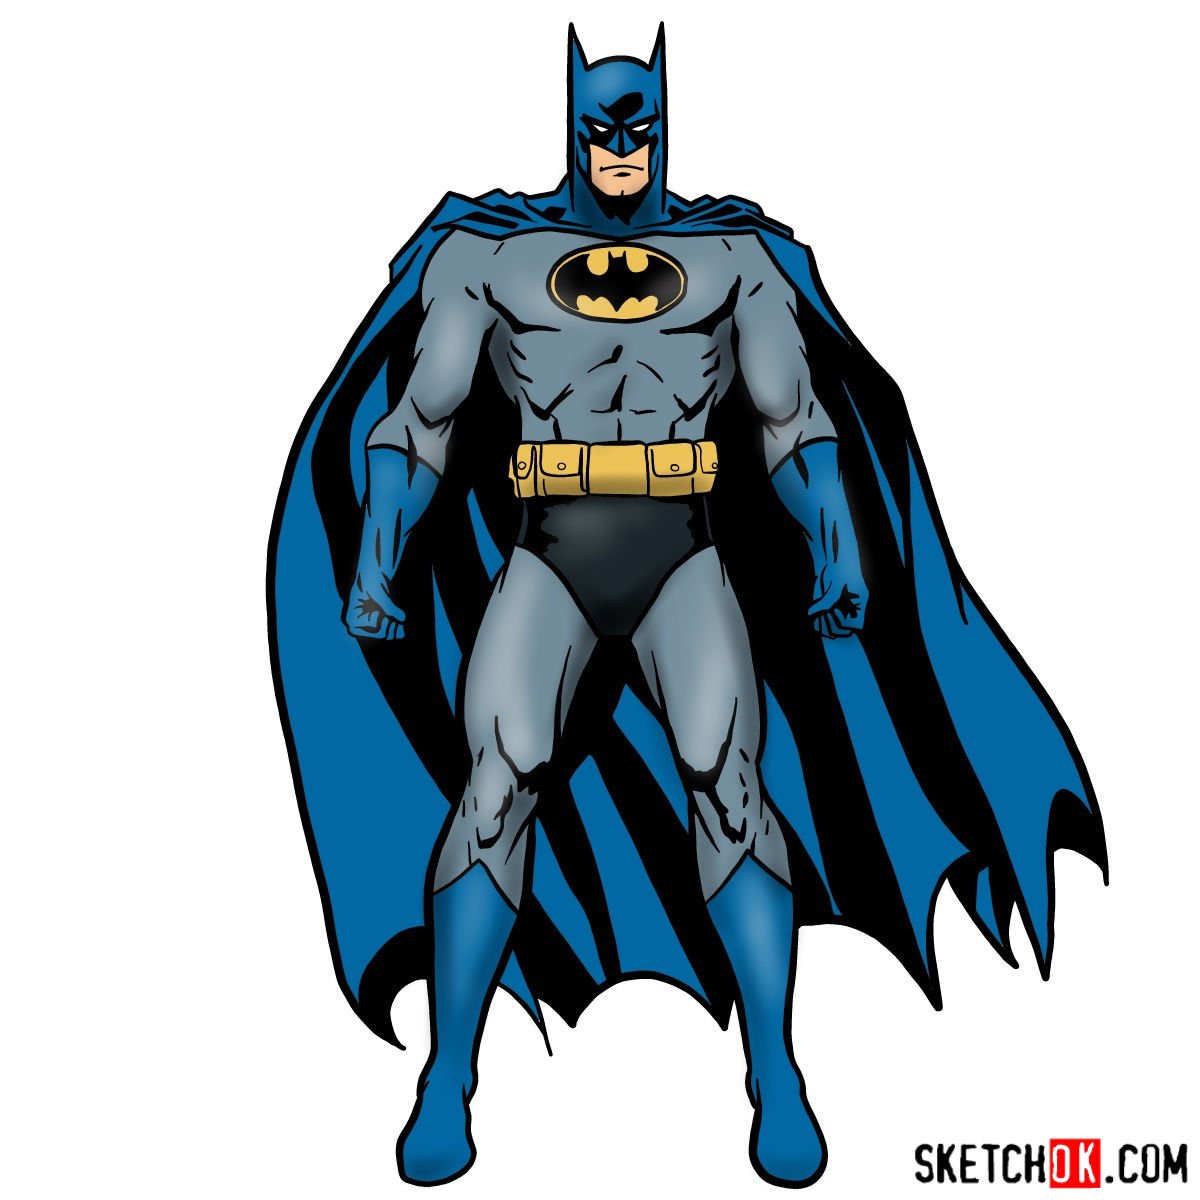 How to draw Batman in a classic suit - Sketchok easy drawing guides